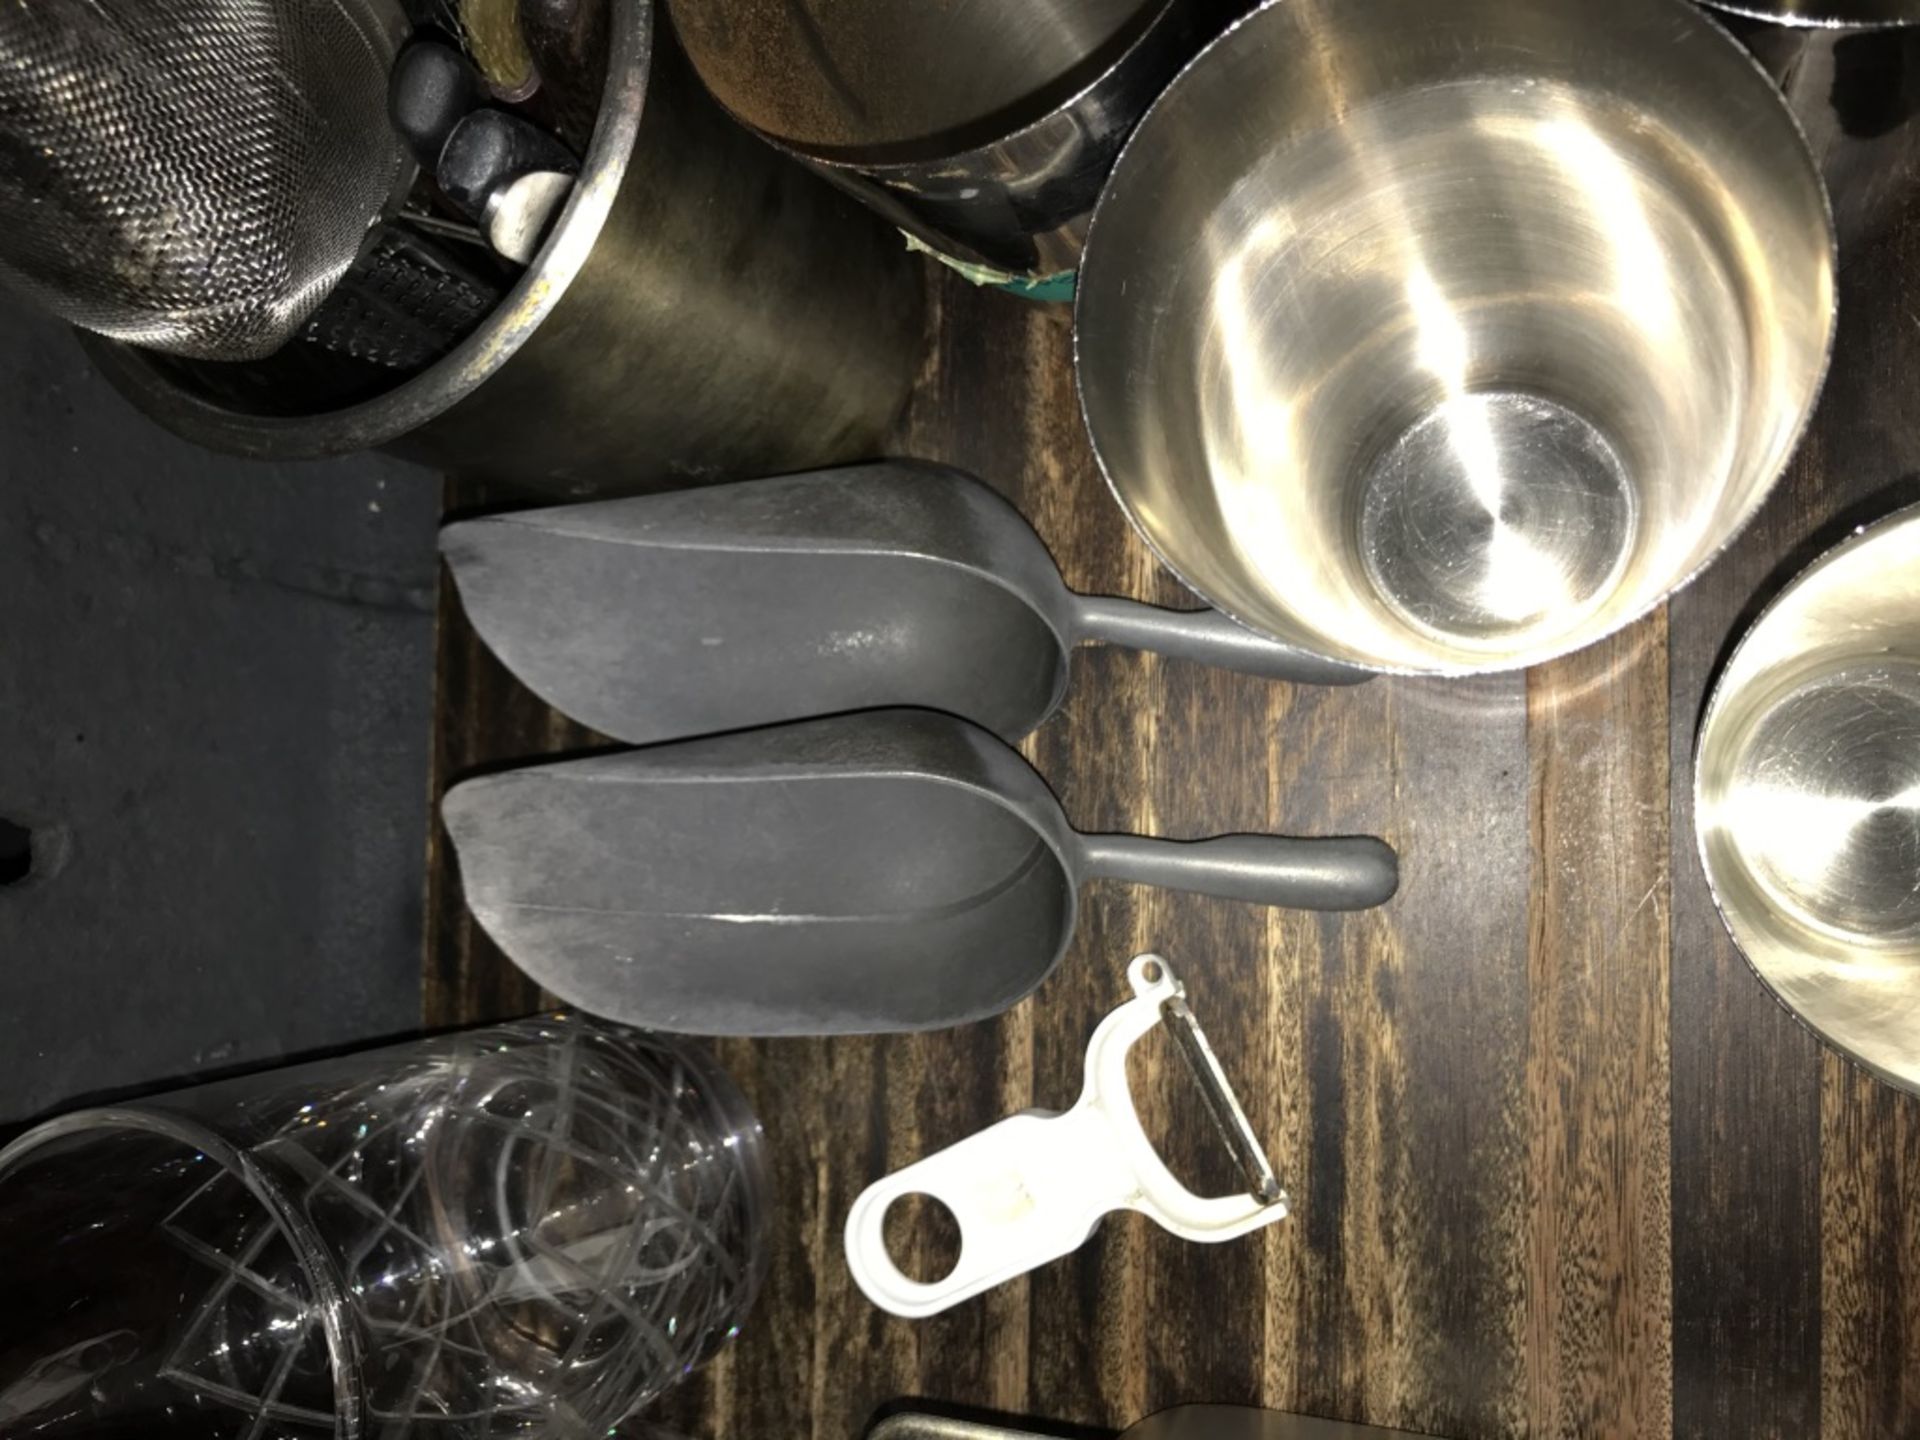 LOT OF: ASSORTED BAR TOOLS(SHAKERS, MIXING GLASSES AND ACCESSORIES, ICE SCOOPERS, STRAINERS,ETC.) - Image 10 of 14